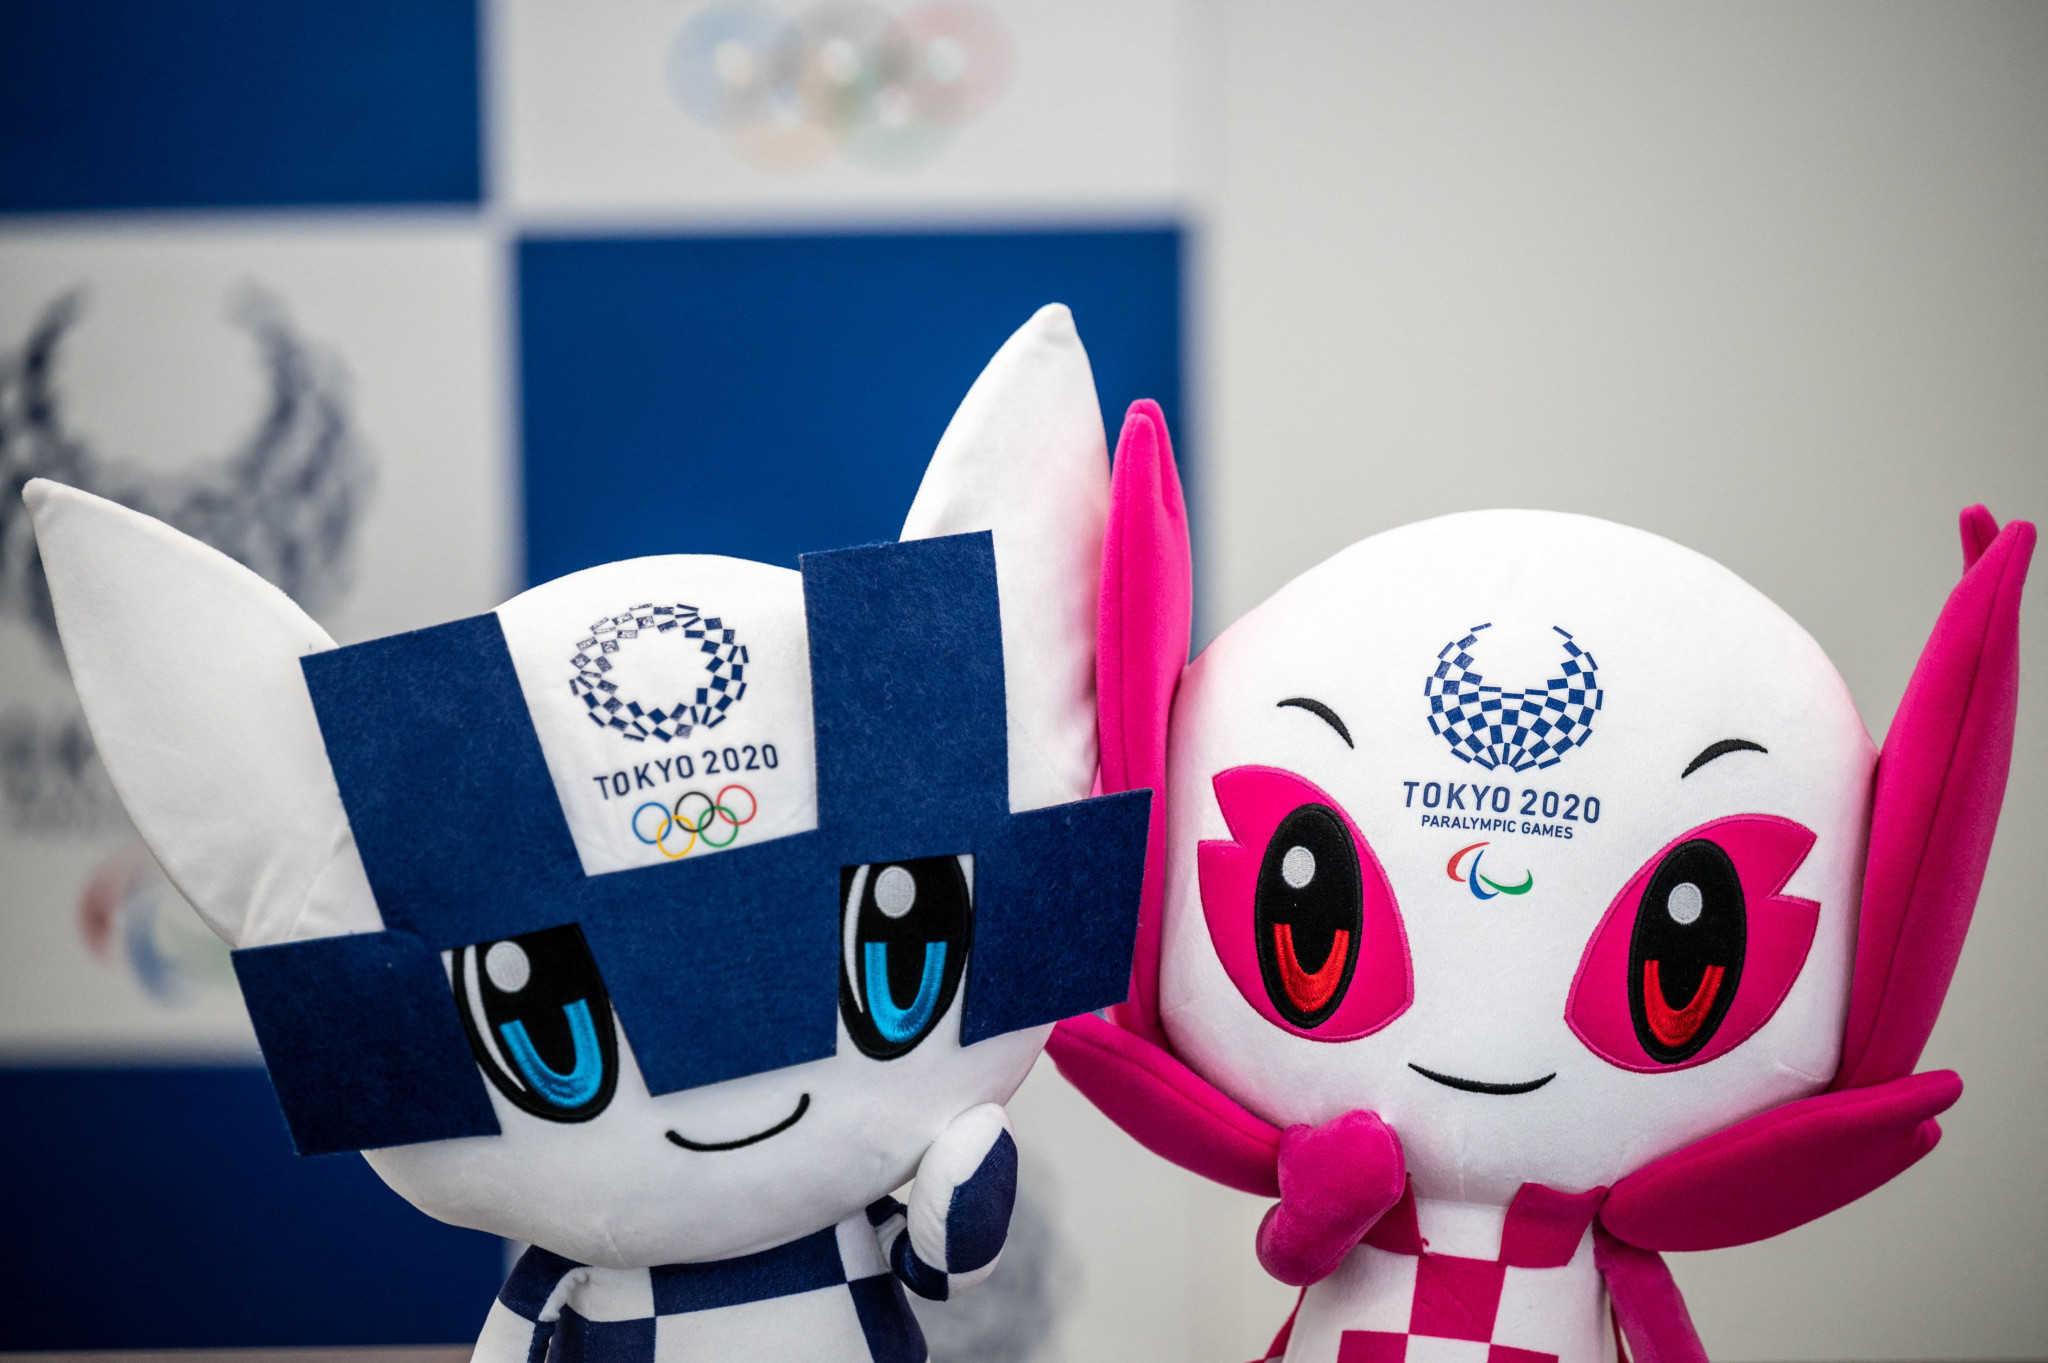 Mascot firm pair given suspended sentence in Tokyo 2020 bribery scandal 